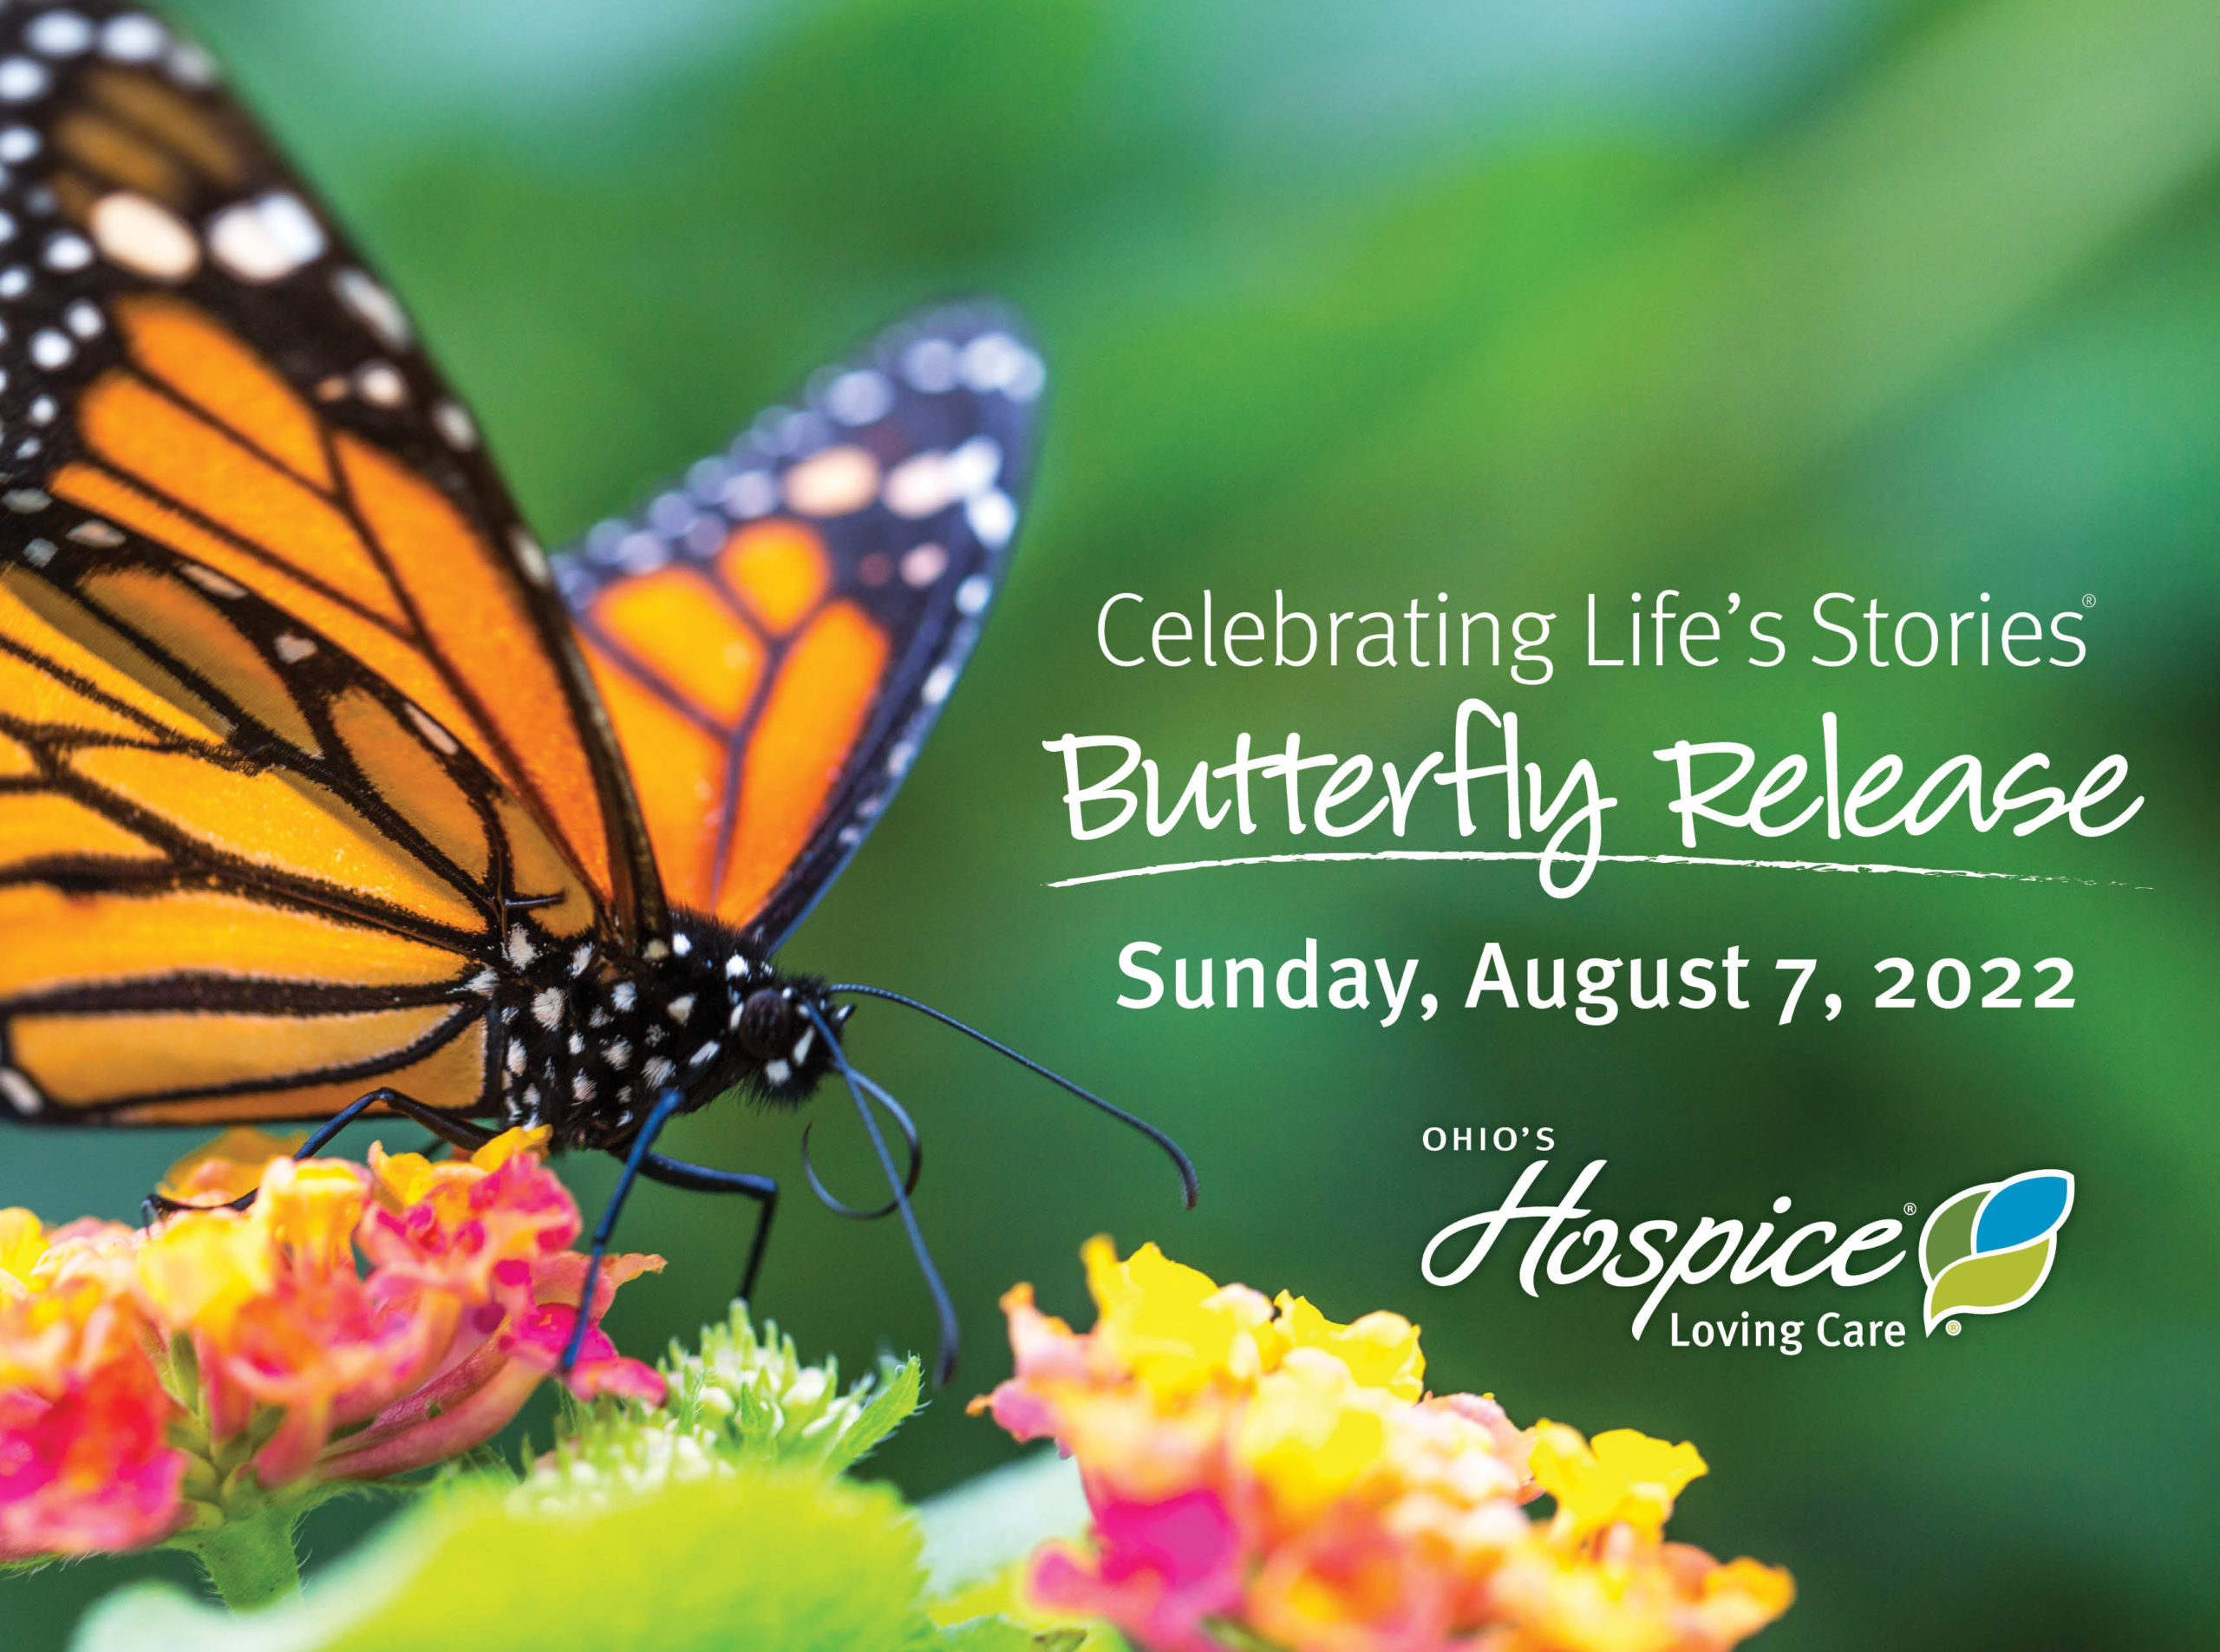 OHLV Celebrating Life's Stories Butterfly Release 2022